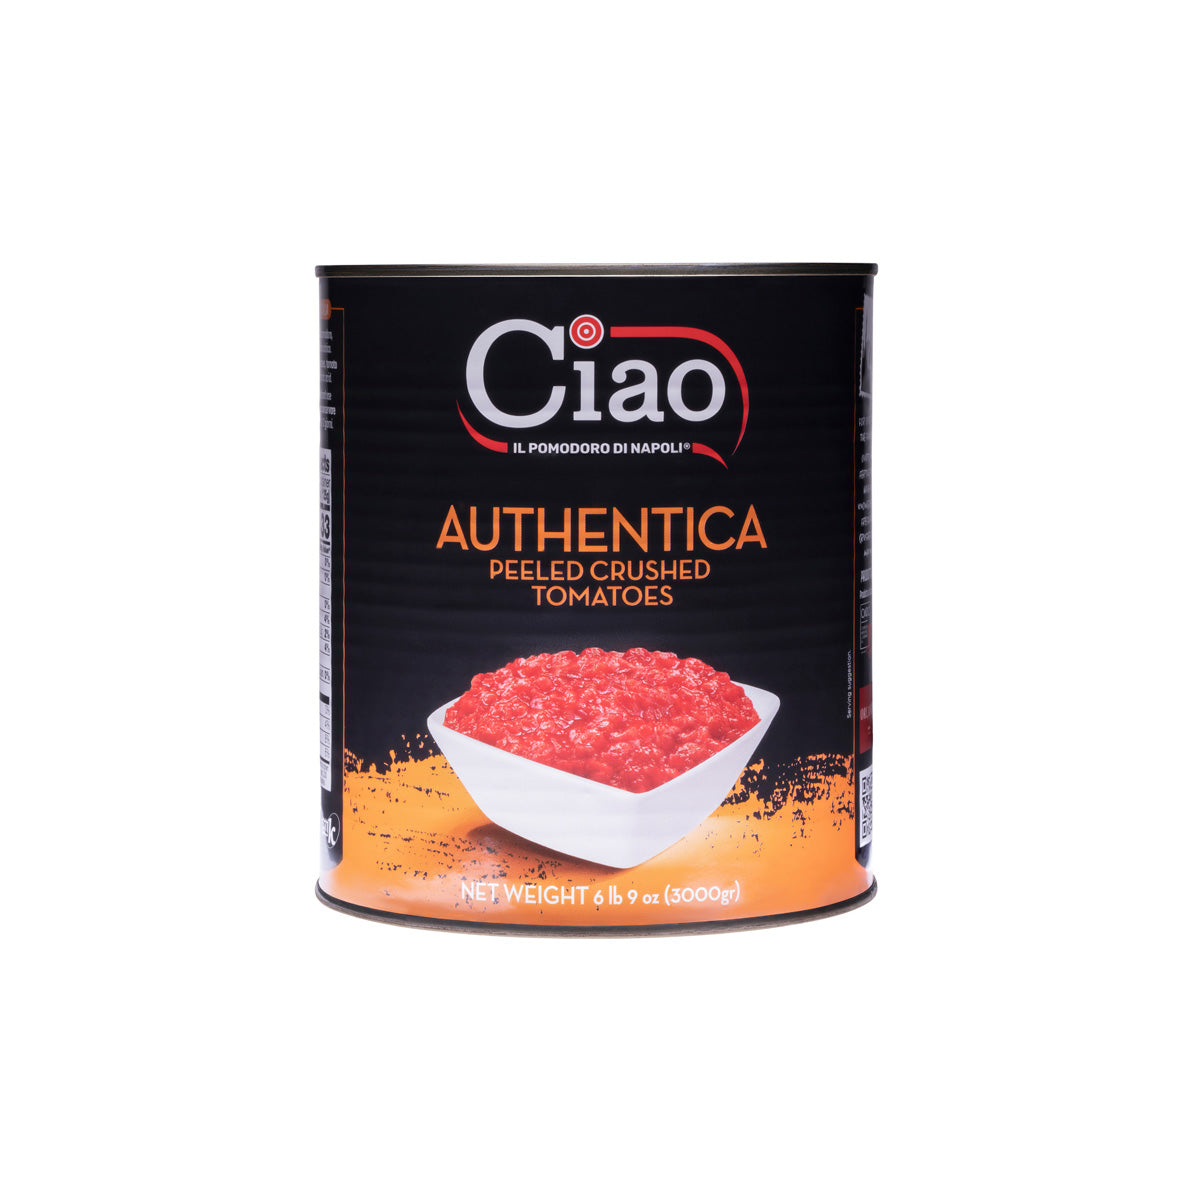 Ciao Authentica Peeled Crushed Tomatoes #10